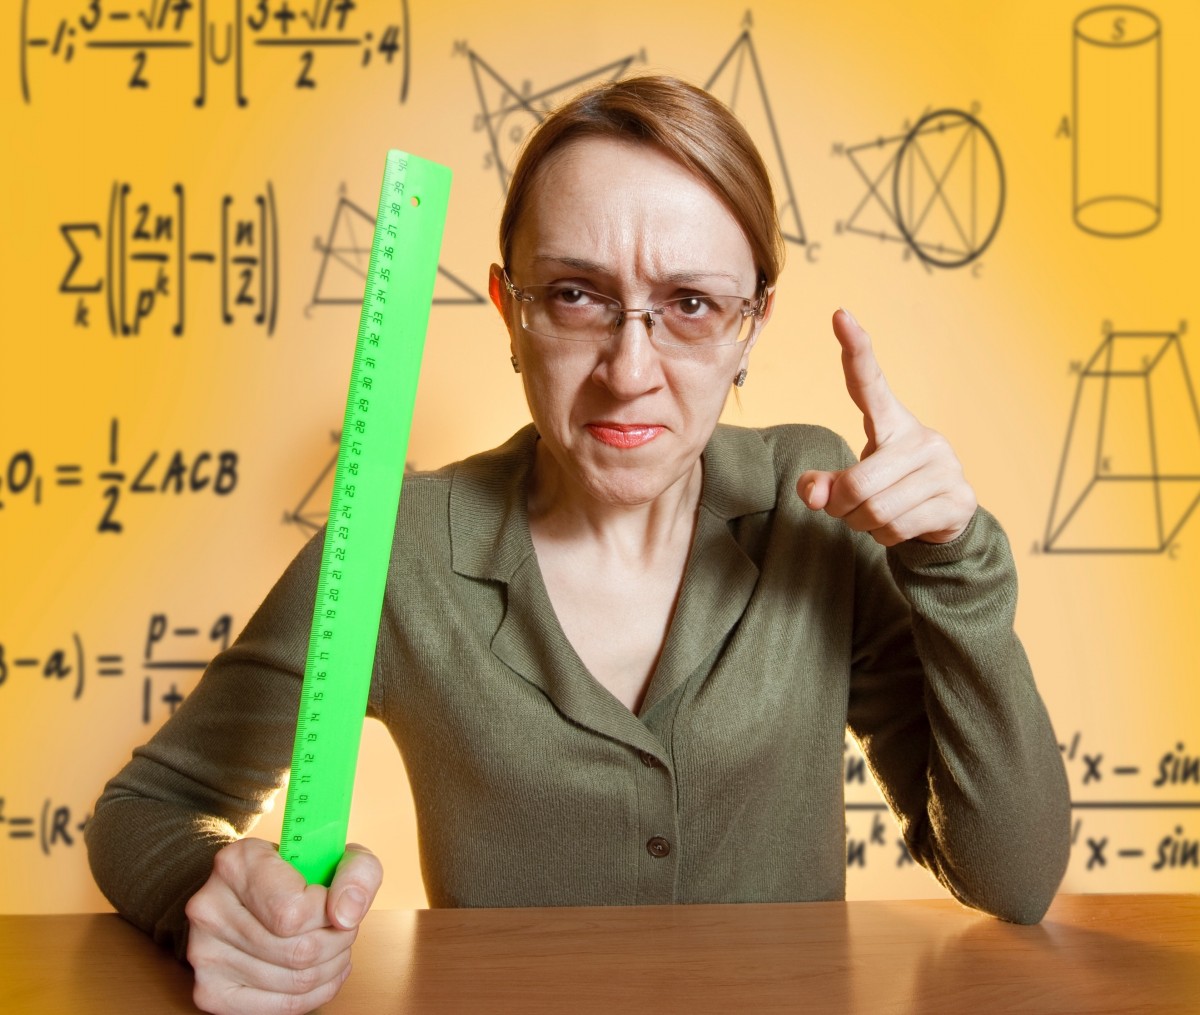 Stern looking teacher is pointing and weilding a brightly colored ruler.